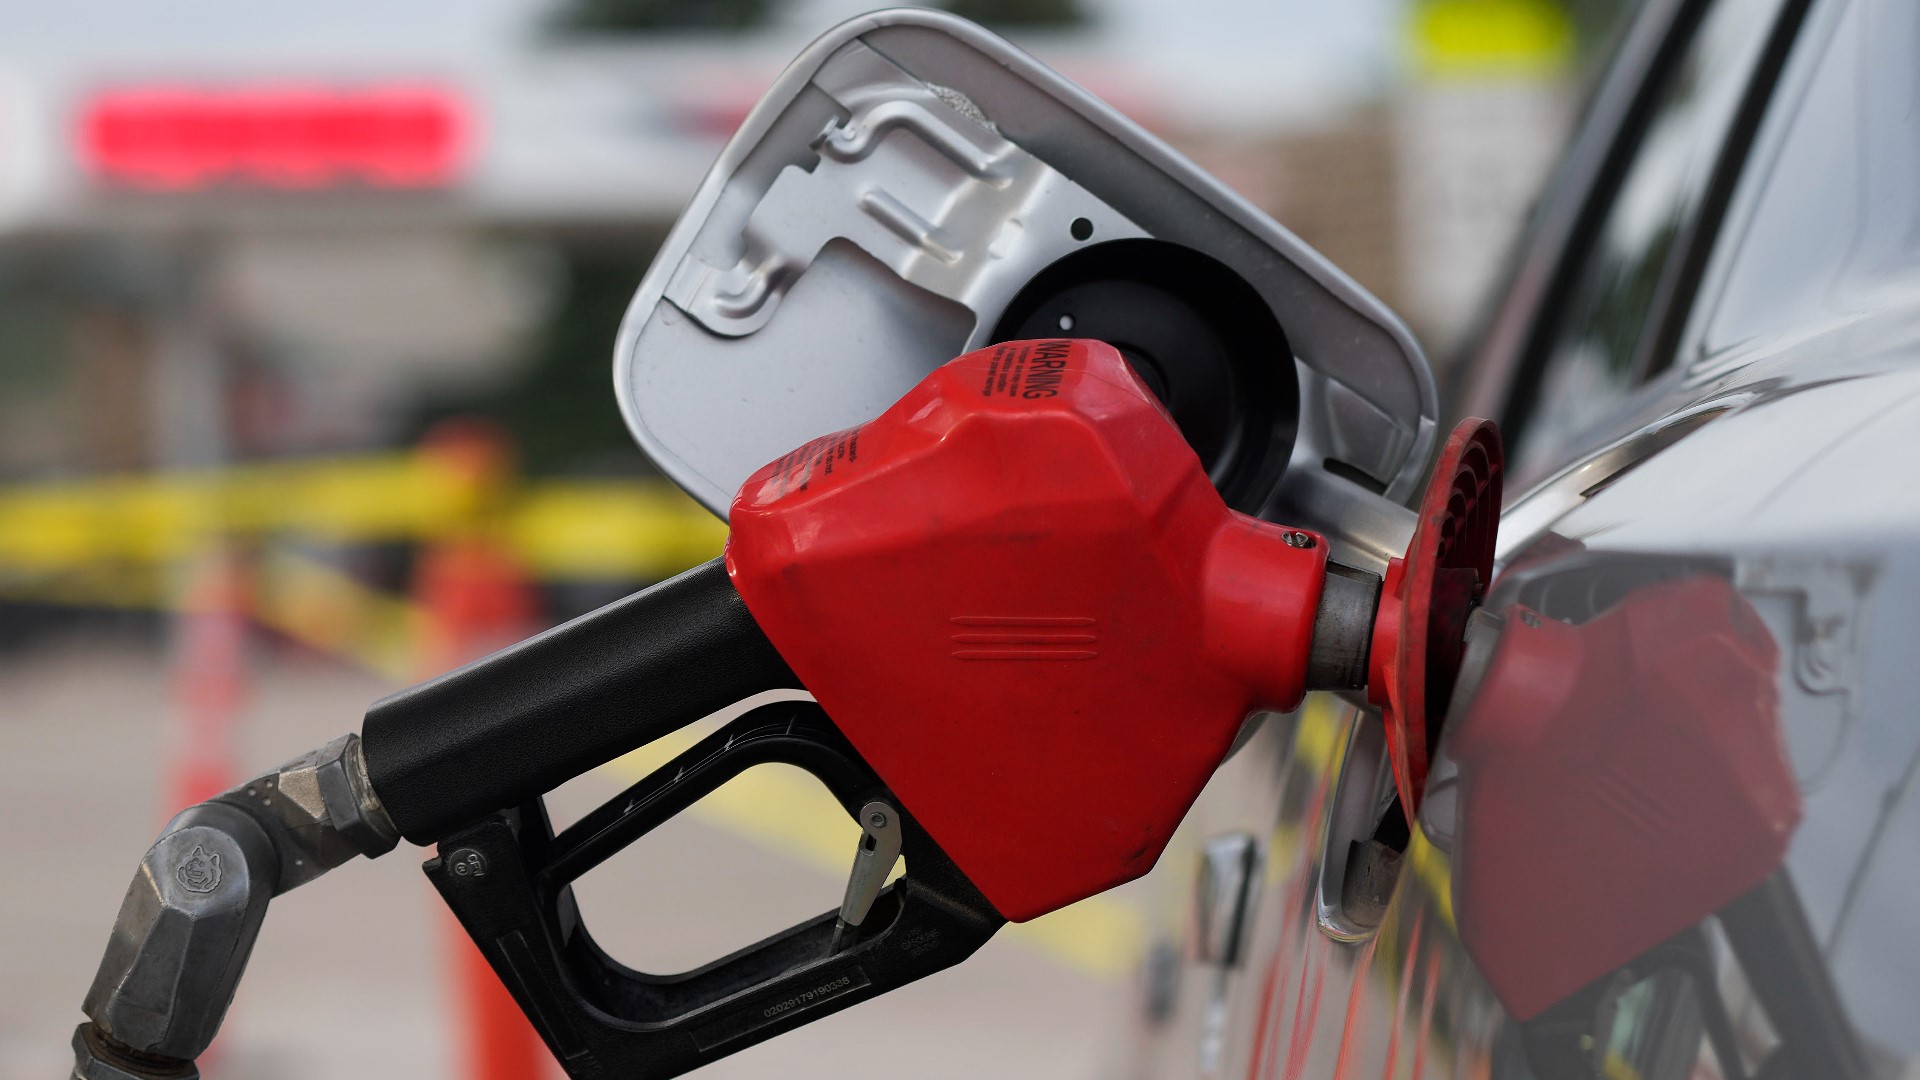 Reports show Arkansas gas prices are 2 cents lower than last week, but 23 cents higher than last month.